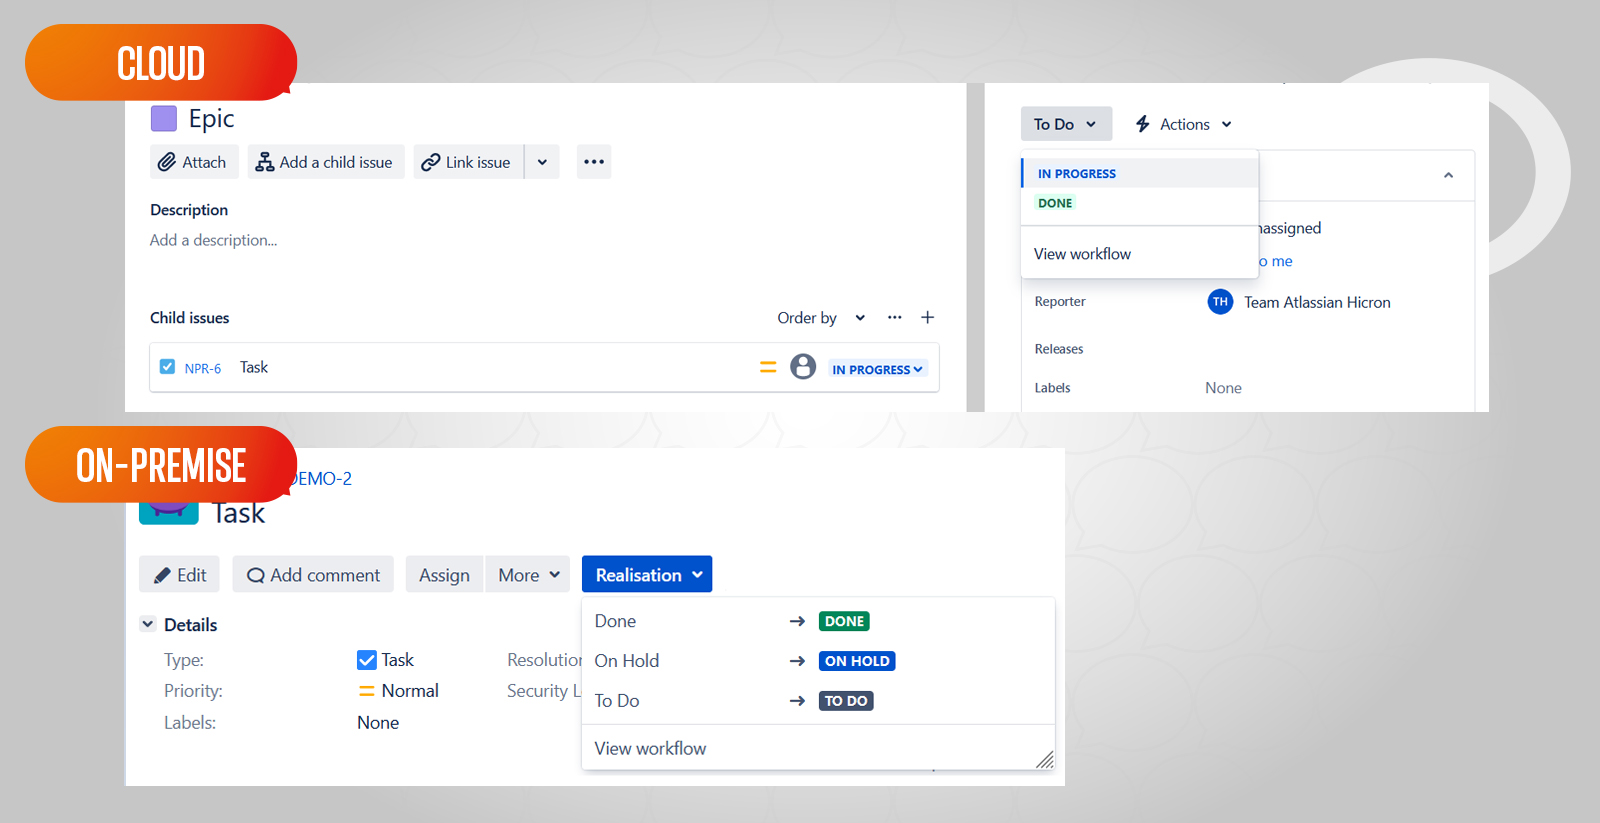 How to change status in Jira ticket